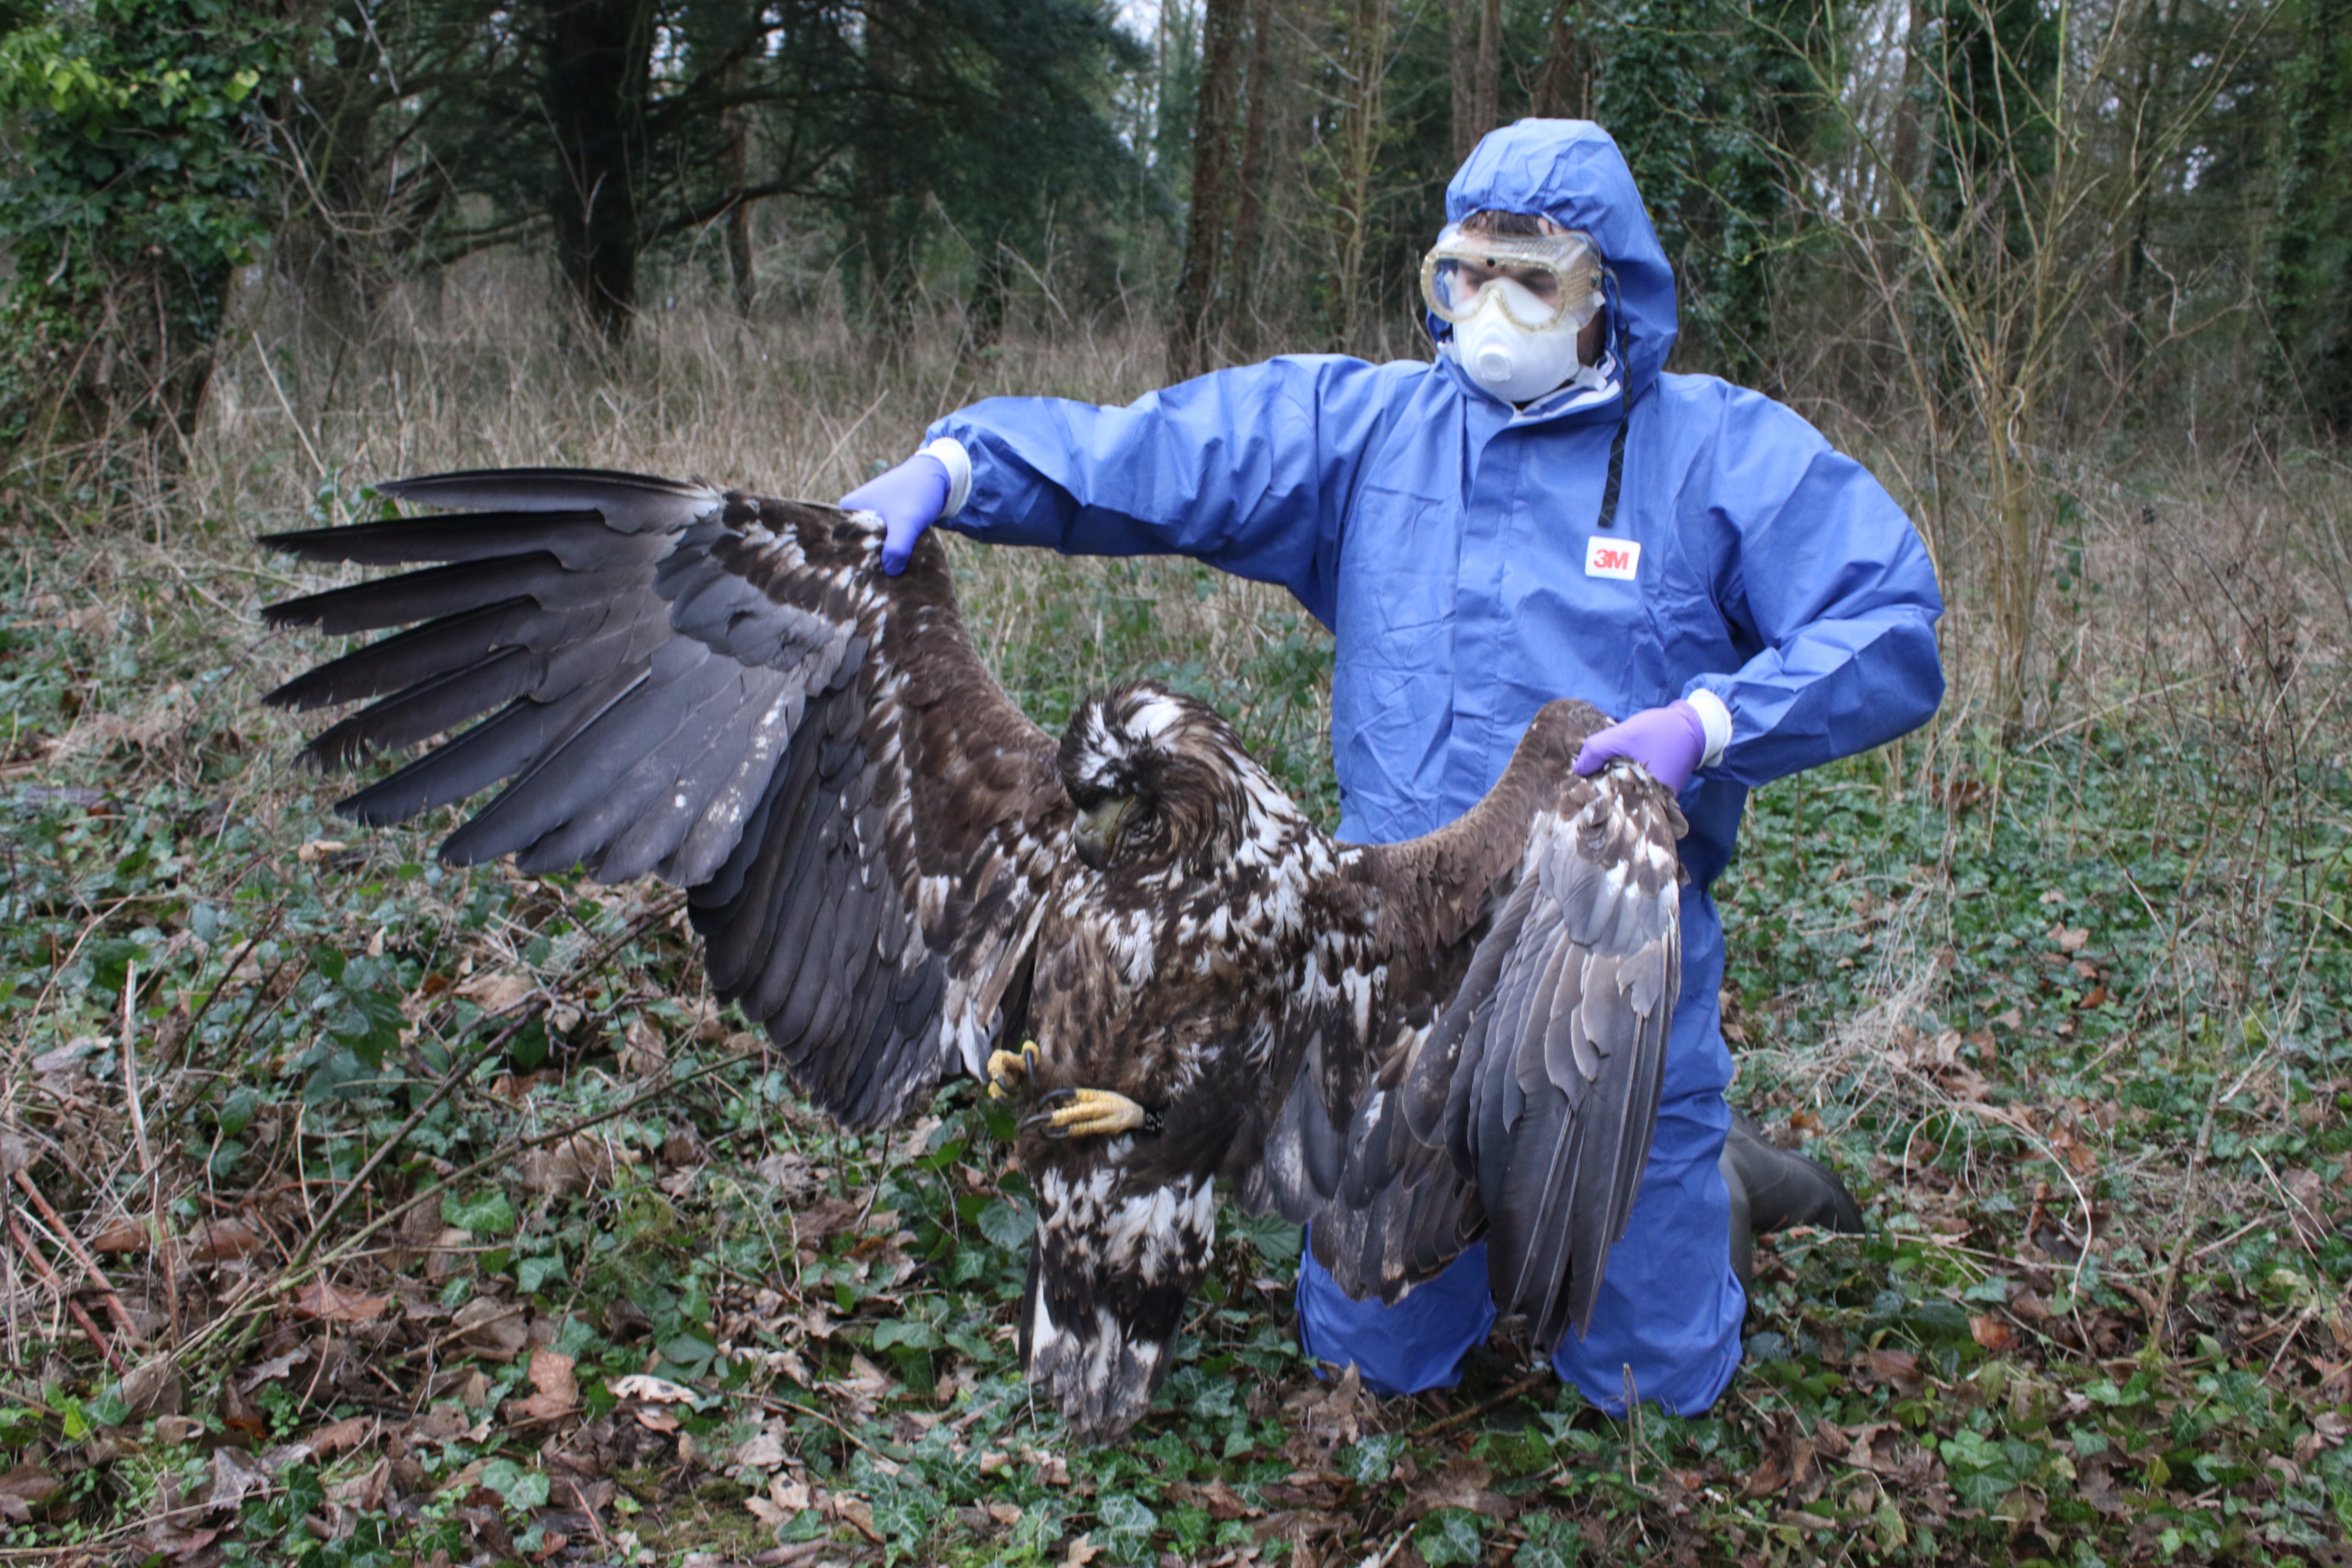 The UK’s largest bird of prey is the white-tailed eagle. This one was found having been poisoned on a shooting estate in Dorset